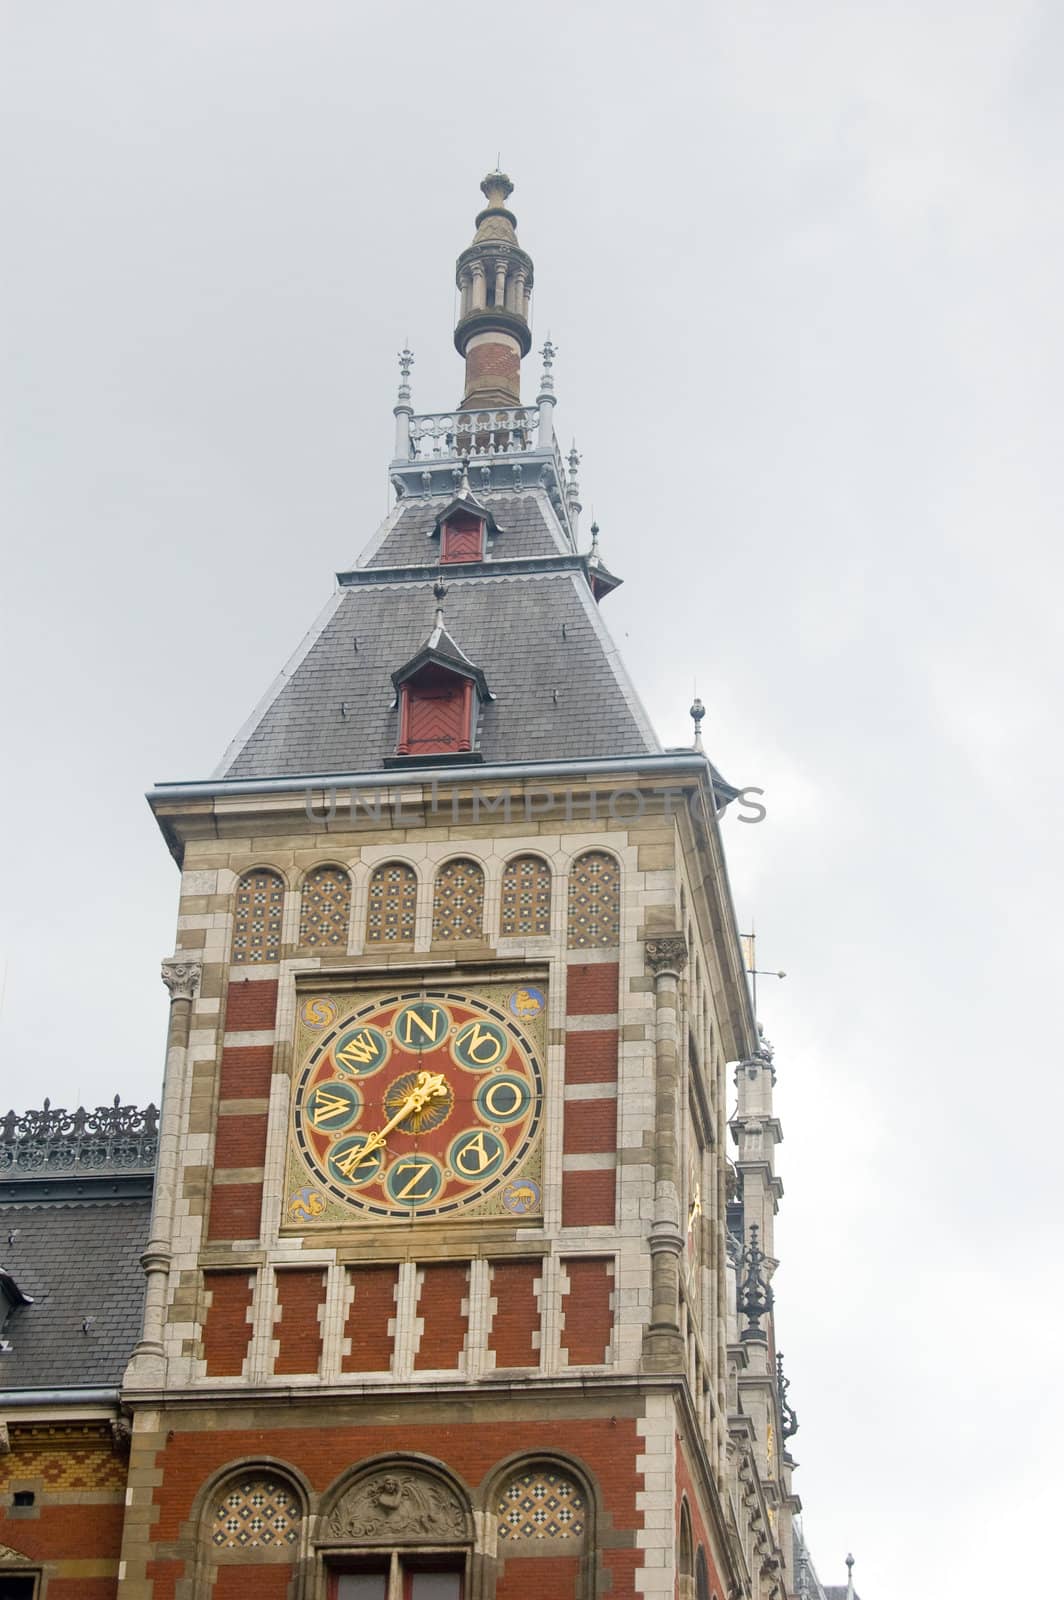 tower of central station in amsterdam with wind direction , the Netherlands